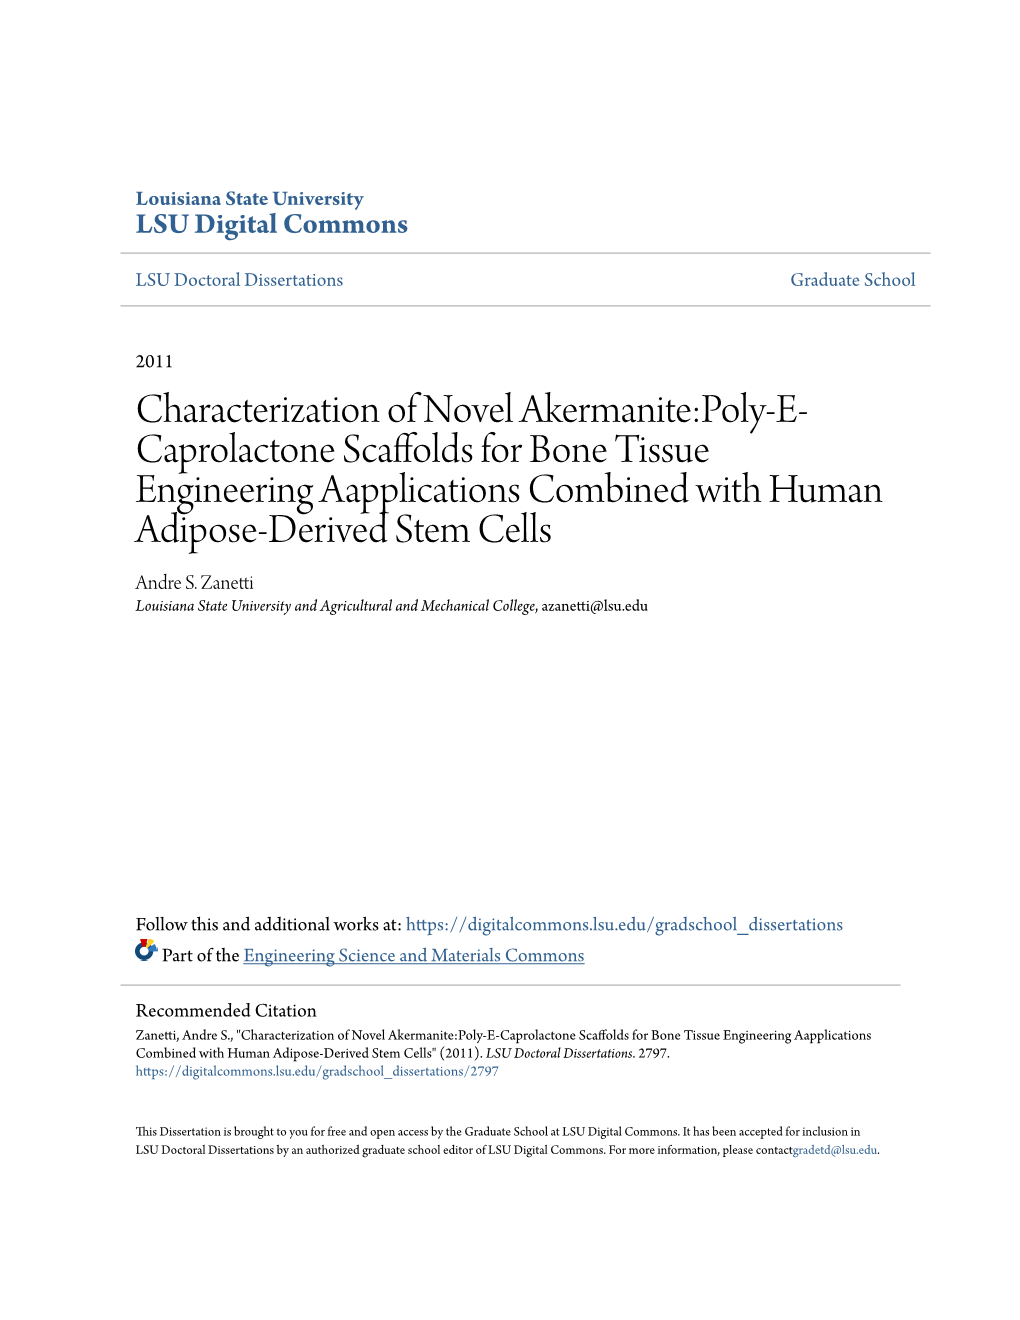 Characterization of Novel Akermanite:Poly-E-Caprolactone Scaffolds for Bone Tissue Engineering Aapplications Combined with Human Adipose-Derived Stem Cells" (2011)